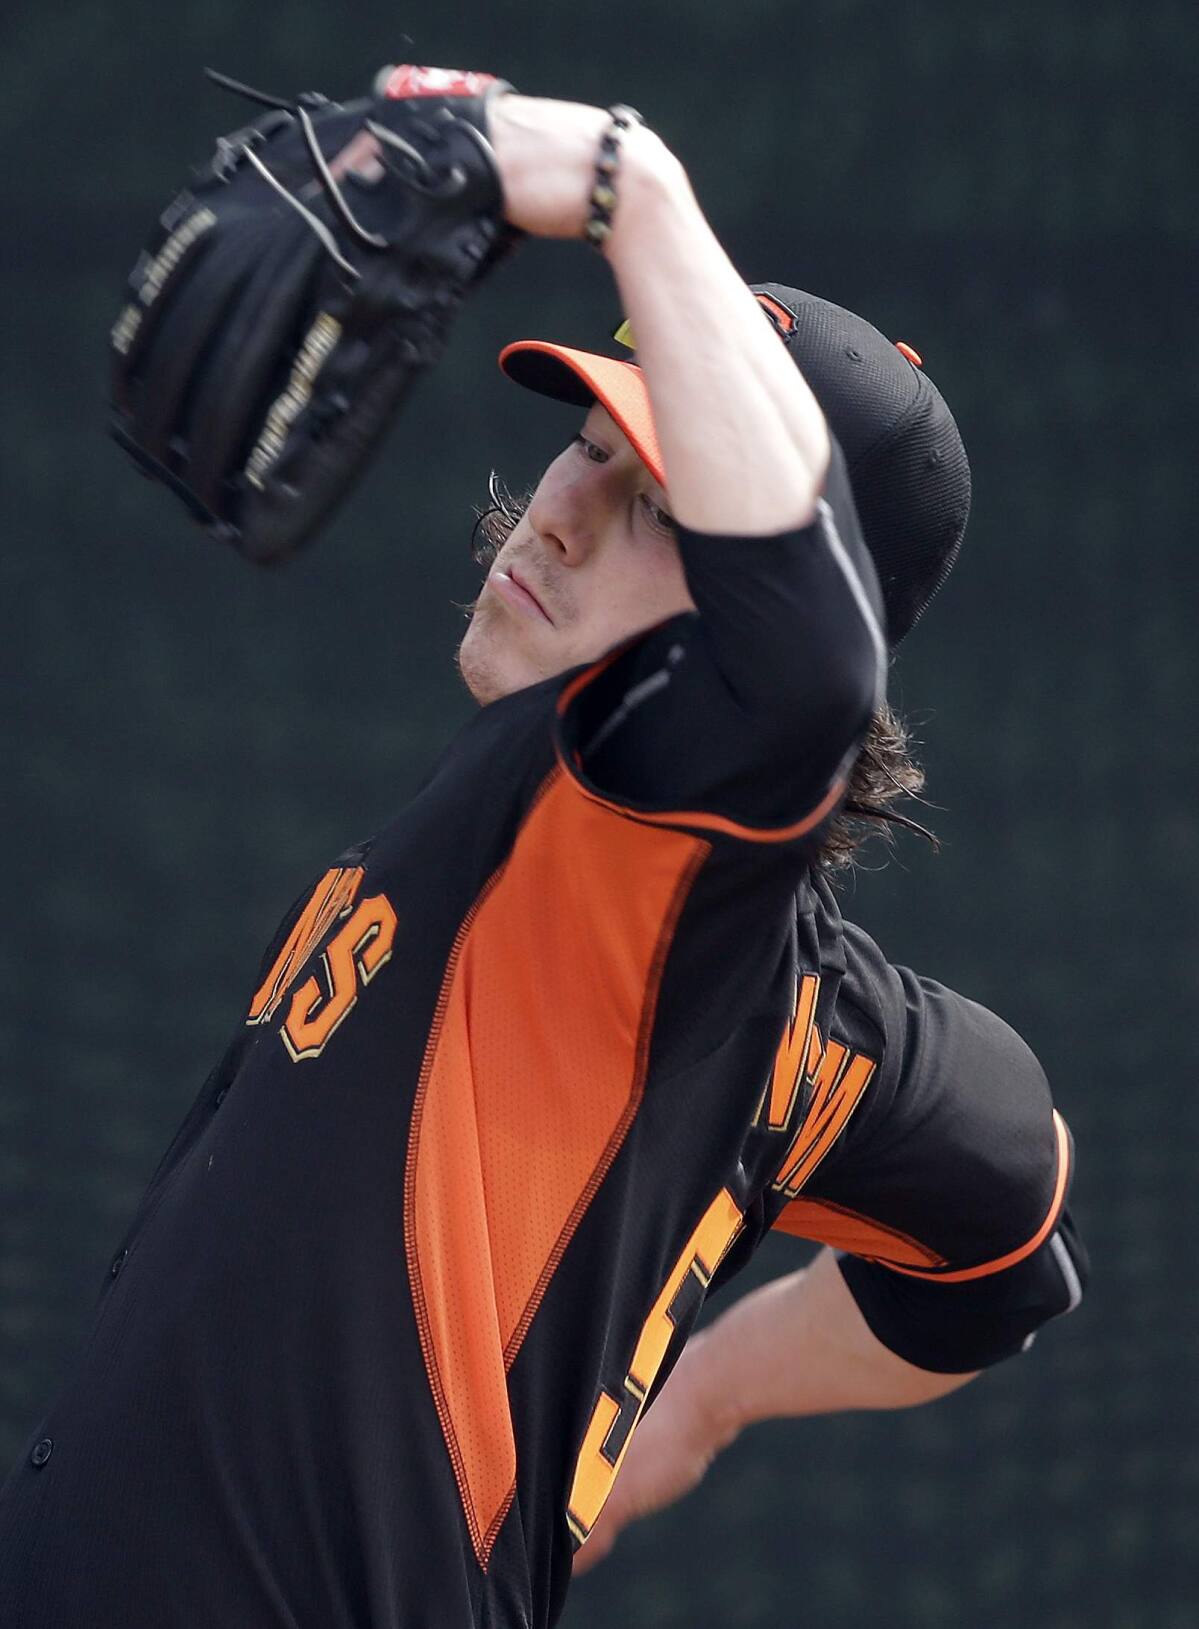 Giants' Tim Lincecum turns to dad for pitching advice